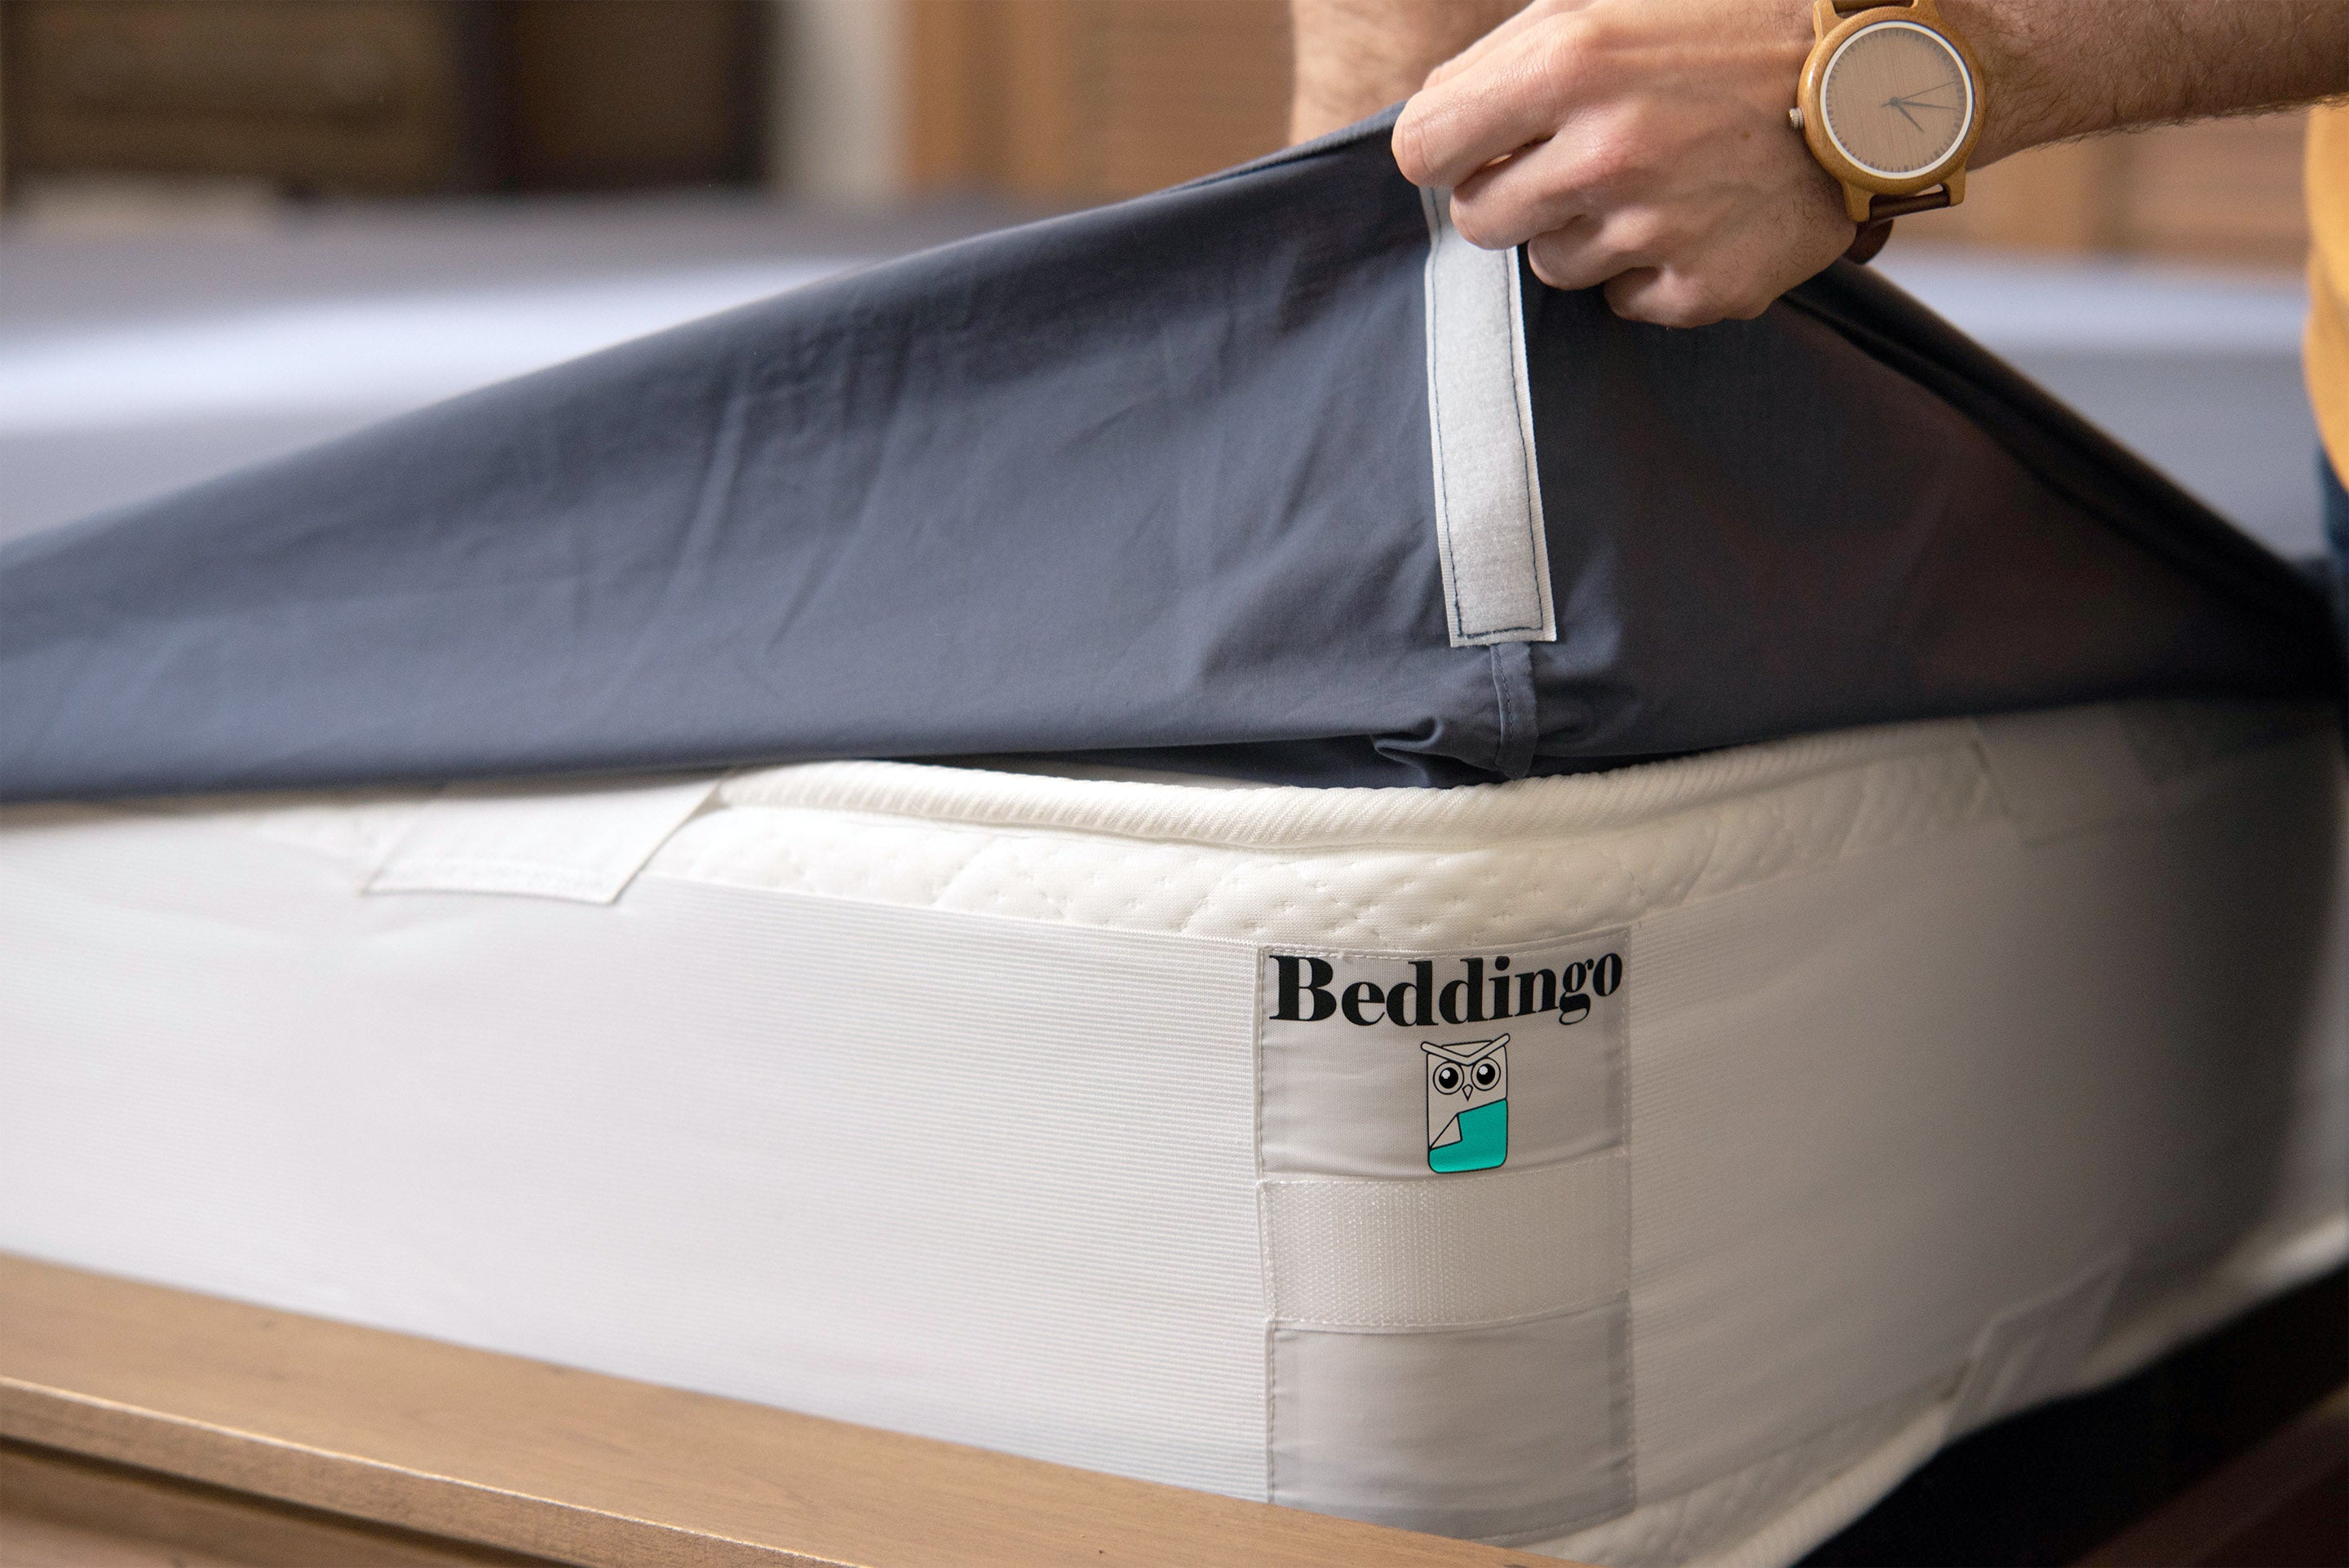 Person holding Beddingo bed sheet with velcro - going to attach to bed corner velcro with Beddingo logo